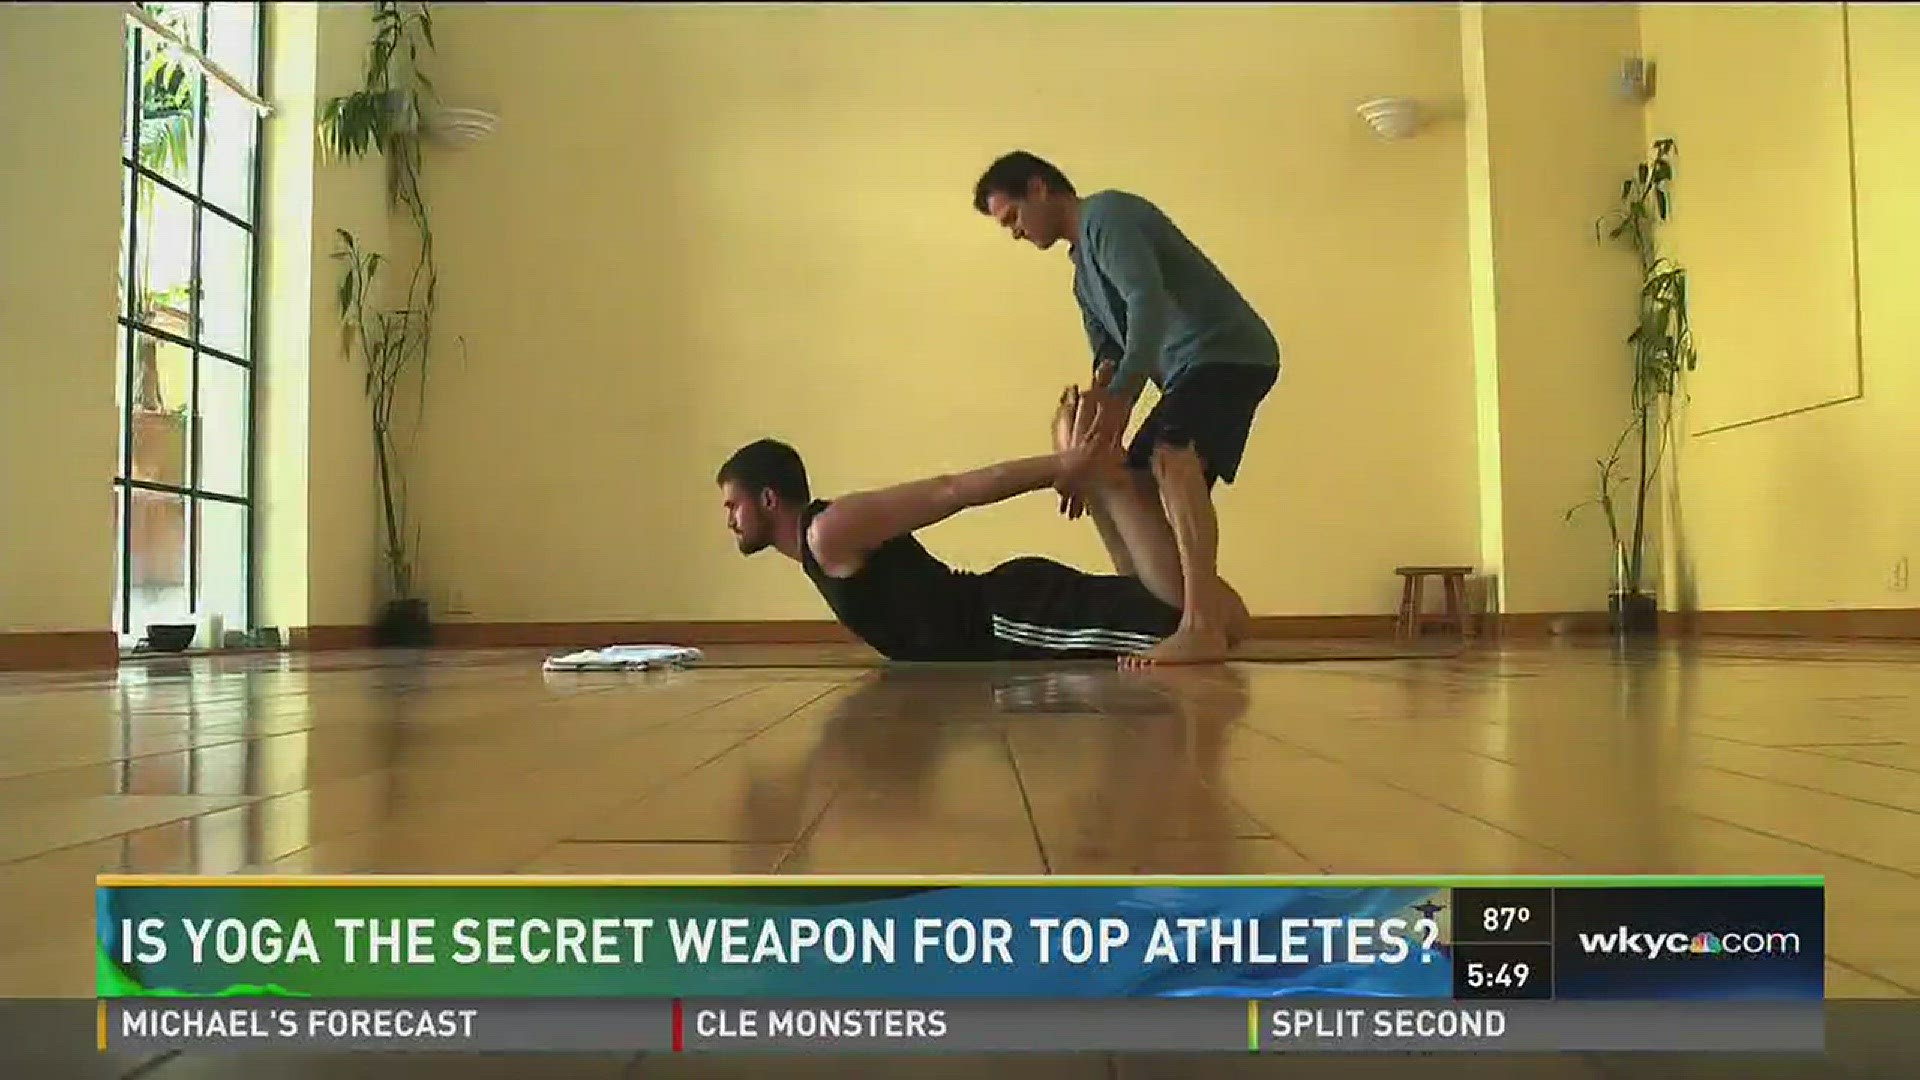 Road to Recovery: Is yoga the secret weapon for Olympic athletes